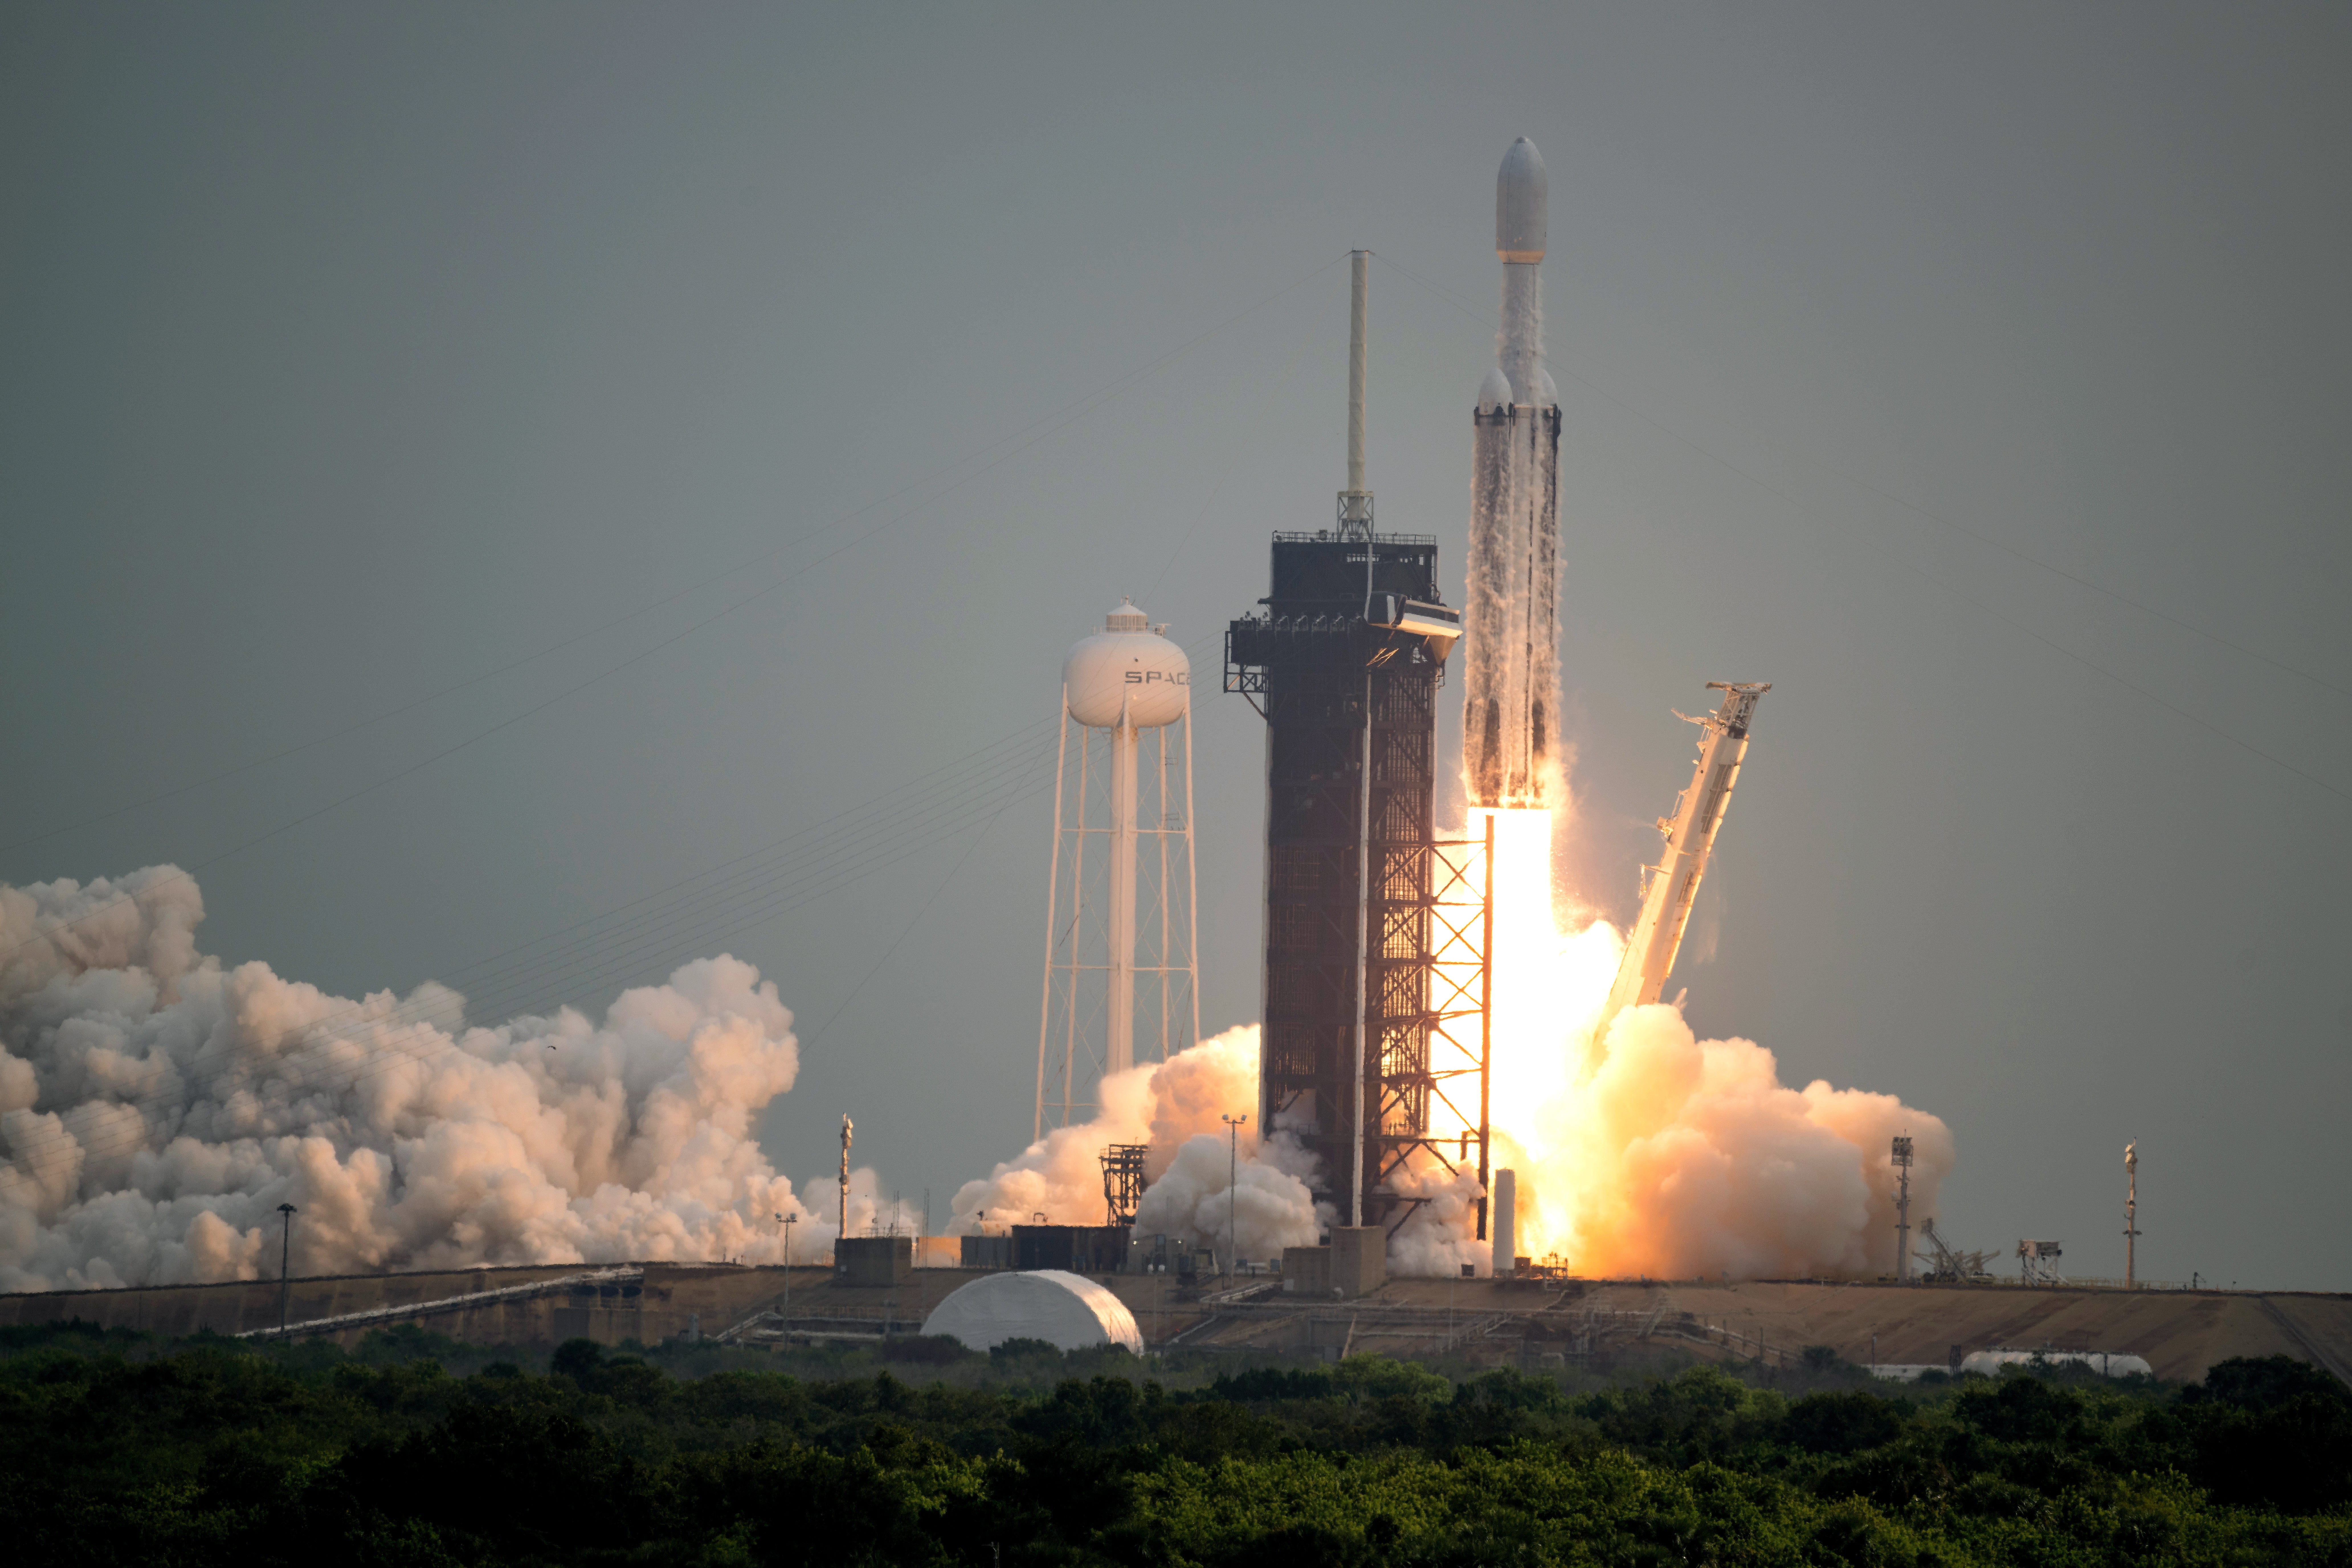 CAPE CANAVERAL, FLORIDA - OCTOBER 13: In this handout provided by NASA, a SpaceX Falcon Heavy rocket with the Psyche spacecraft onboard is launched from Launch Complex 39A, October 13, 2023 at NASA's Kennedy Space Center in Cape Canaveral, Florida. NASA's Psyche spacecraft will travel to a metal-rich asteroid by the same name orbiting the Sun between Mars and Jupiter to study its composition. The spacecraft also carries the agency's Deep Space Optical Communications technology demonstration, which will test laser communications beyond the Moon. (Photo by Aubrey Gemignani/NASA via Getty Images)